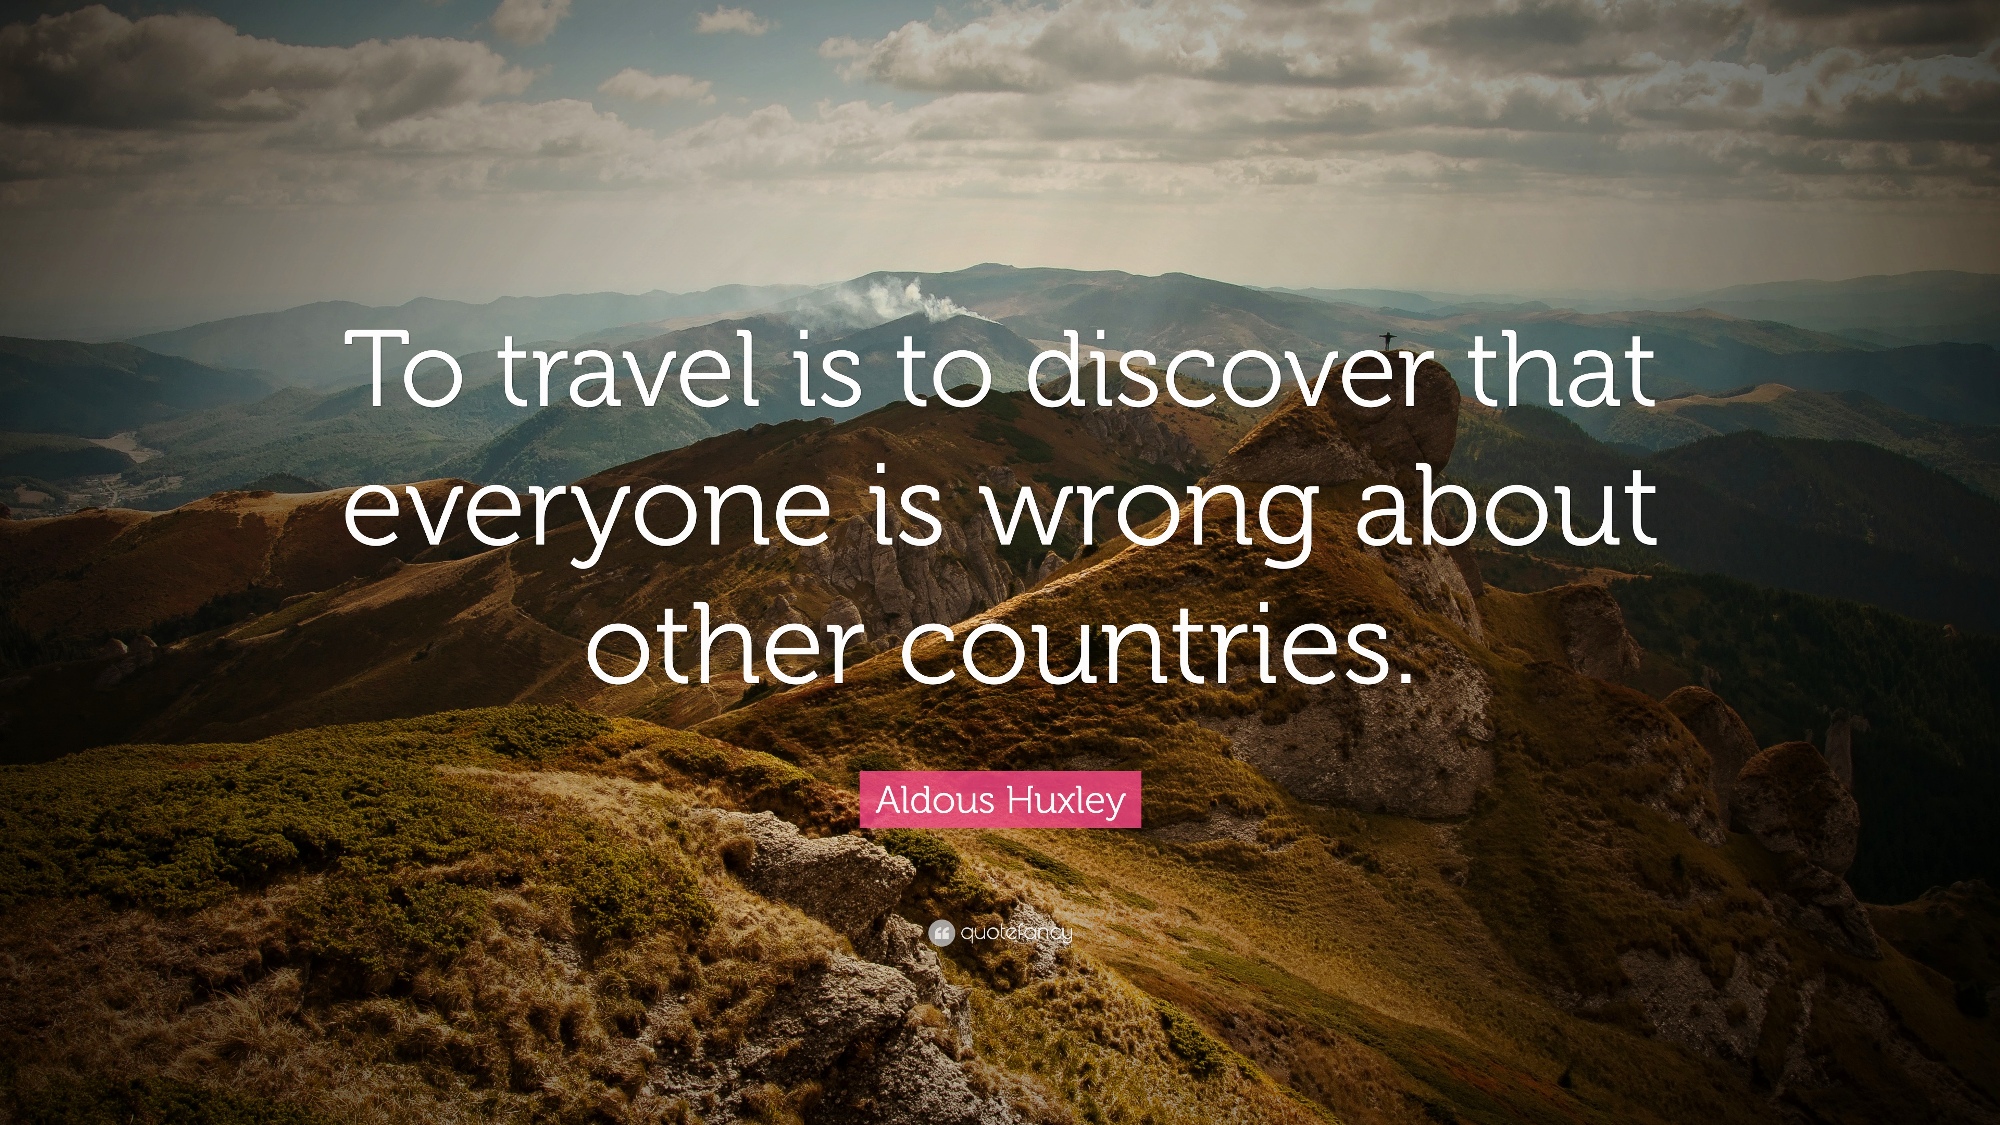 17270-Aldous-Huxley-Quote-To-travel-is-to-discover-that-everyone-is.jpg